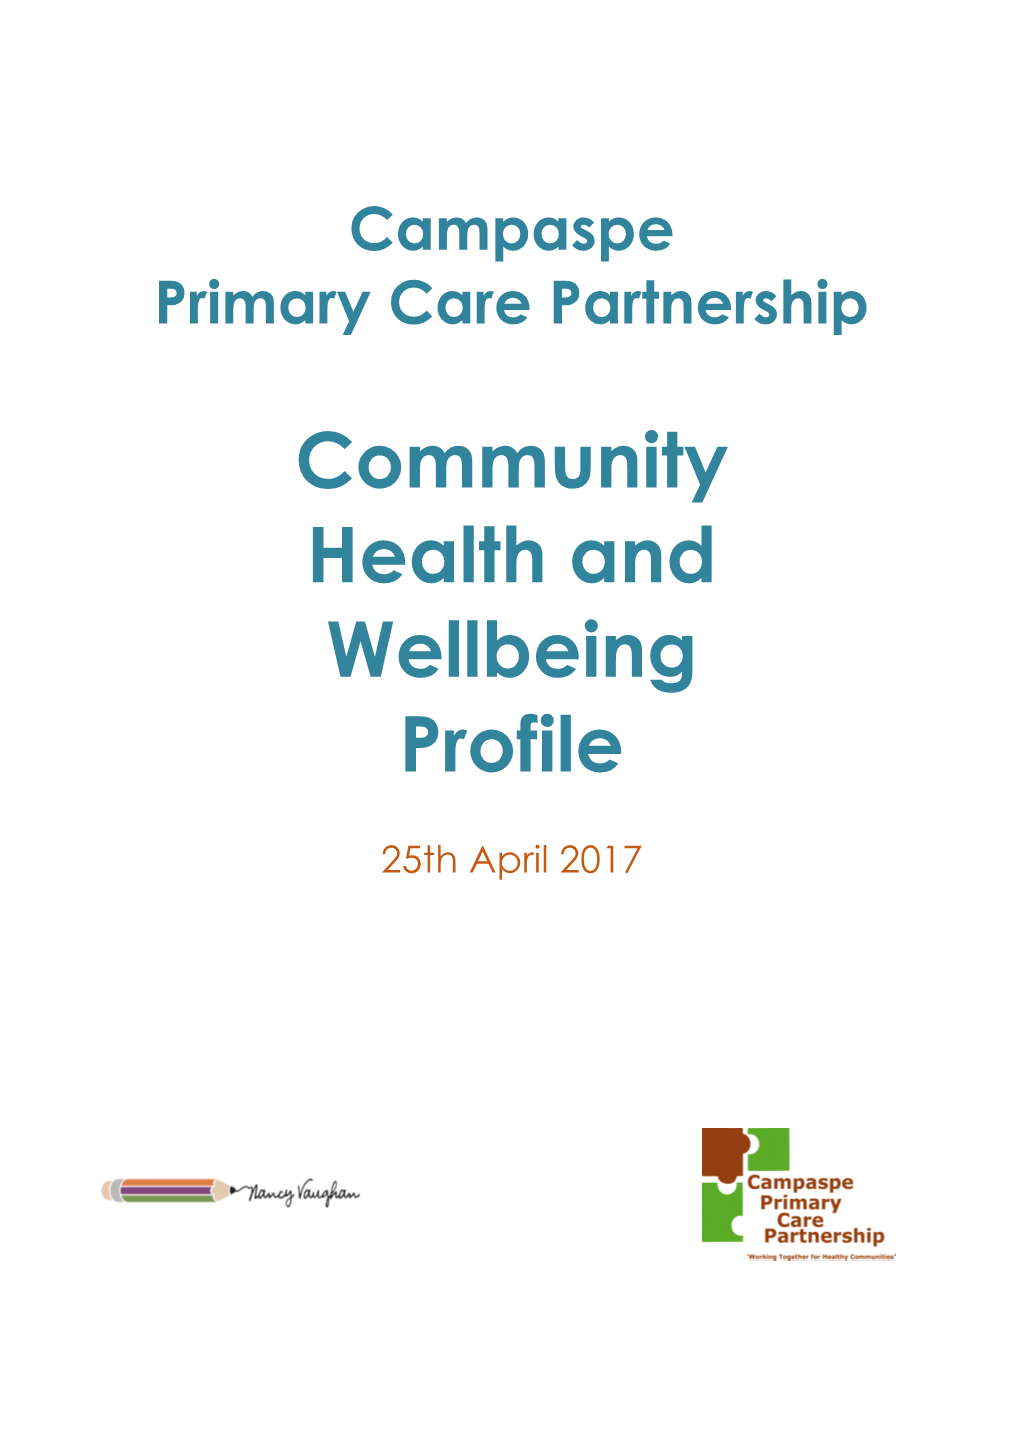 Community Health and Wellbeing Profile